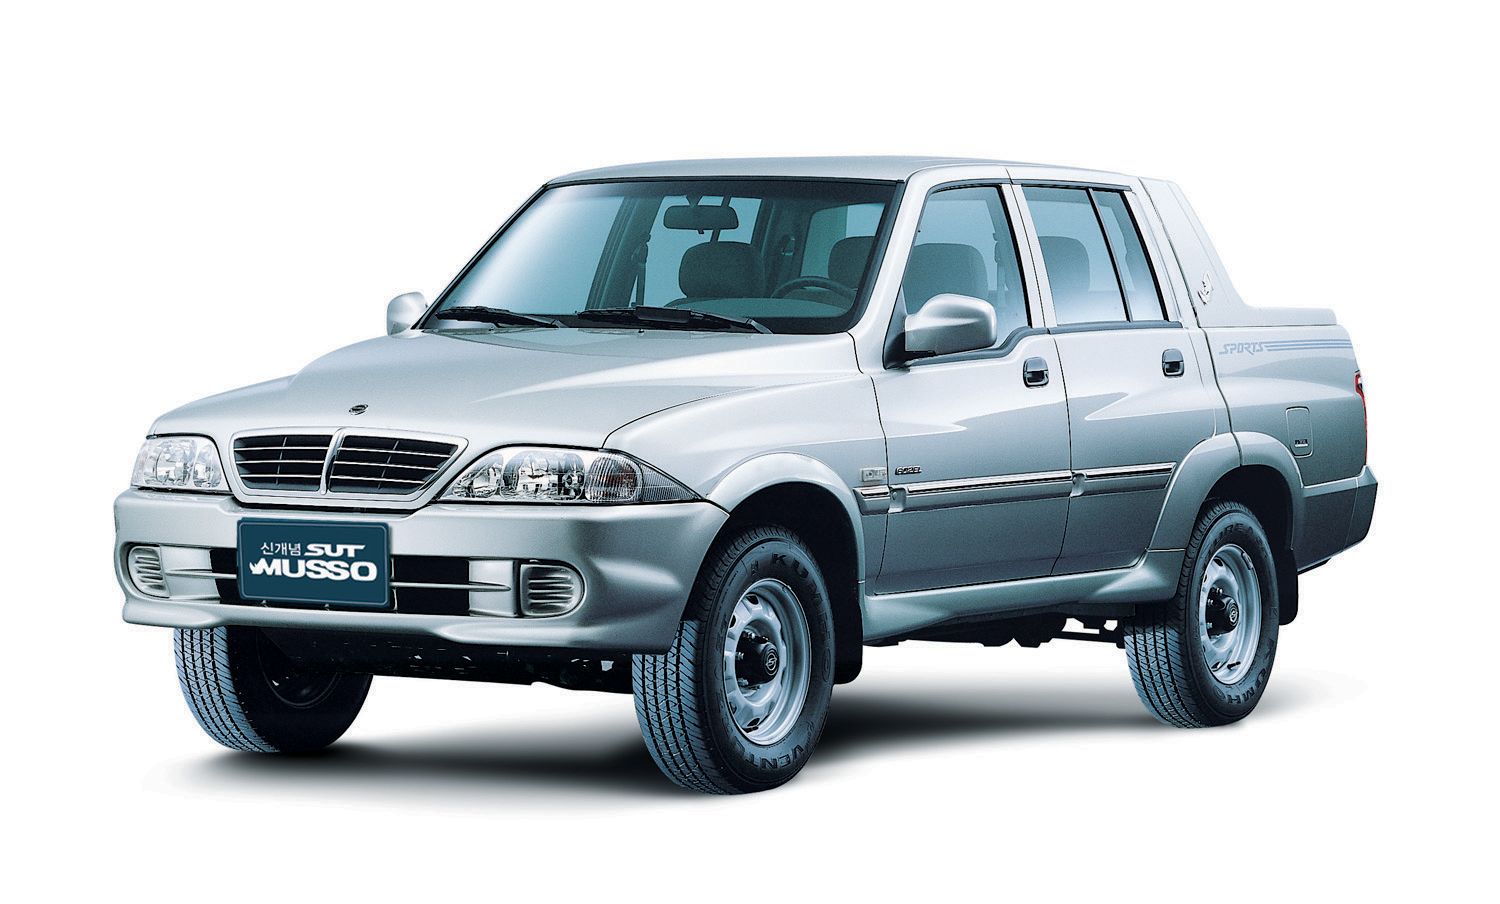 Ssangyong musso sport. SSANGYONG Musso 1. Санг енг Муссо спорт. SSANGYONG Musso 2002. Санг енг Муссо 2002.